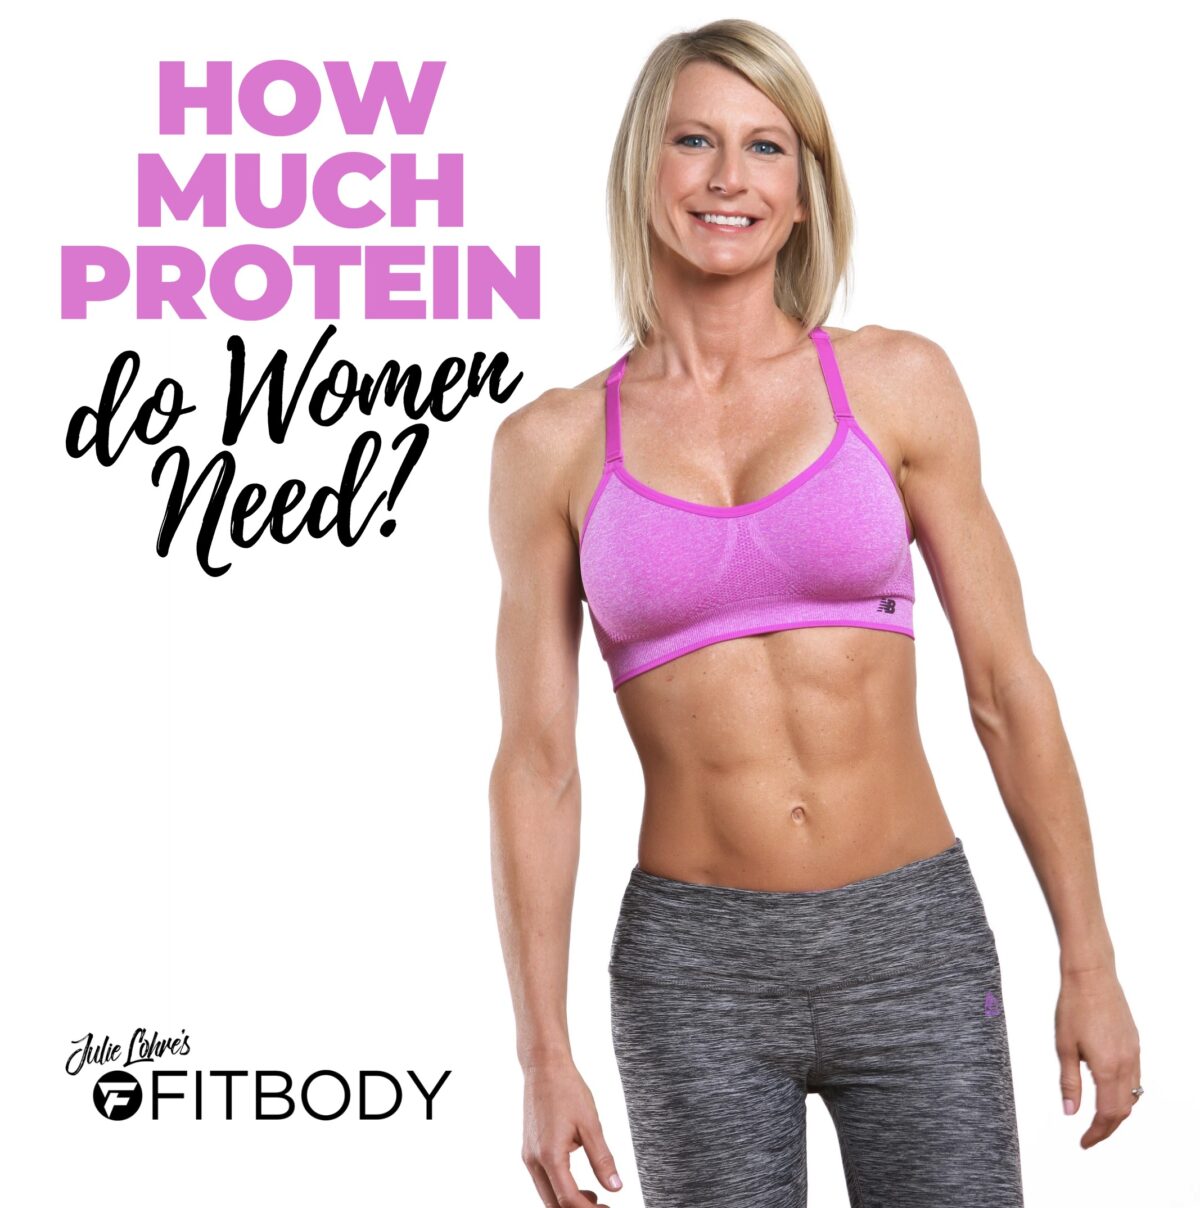 How Much Protein Per Day to Build Muscle Female